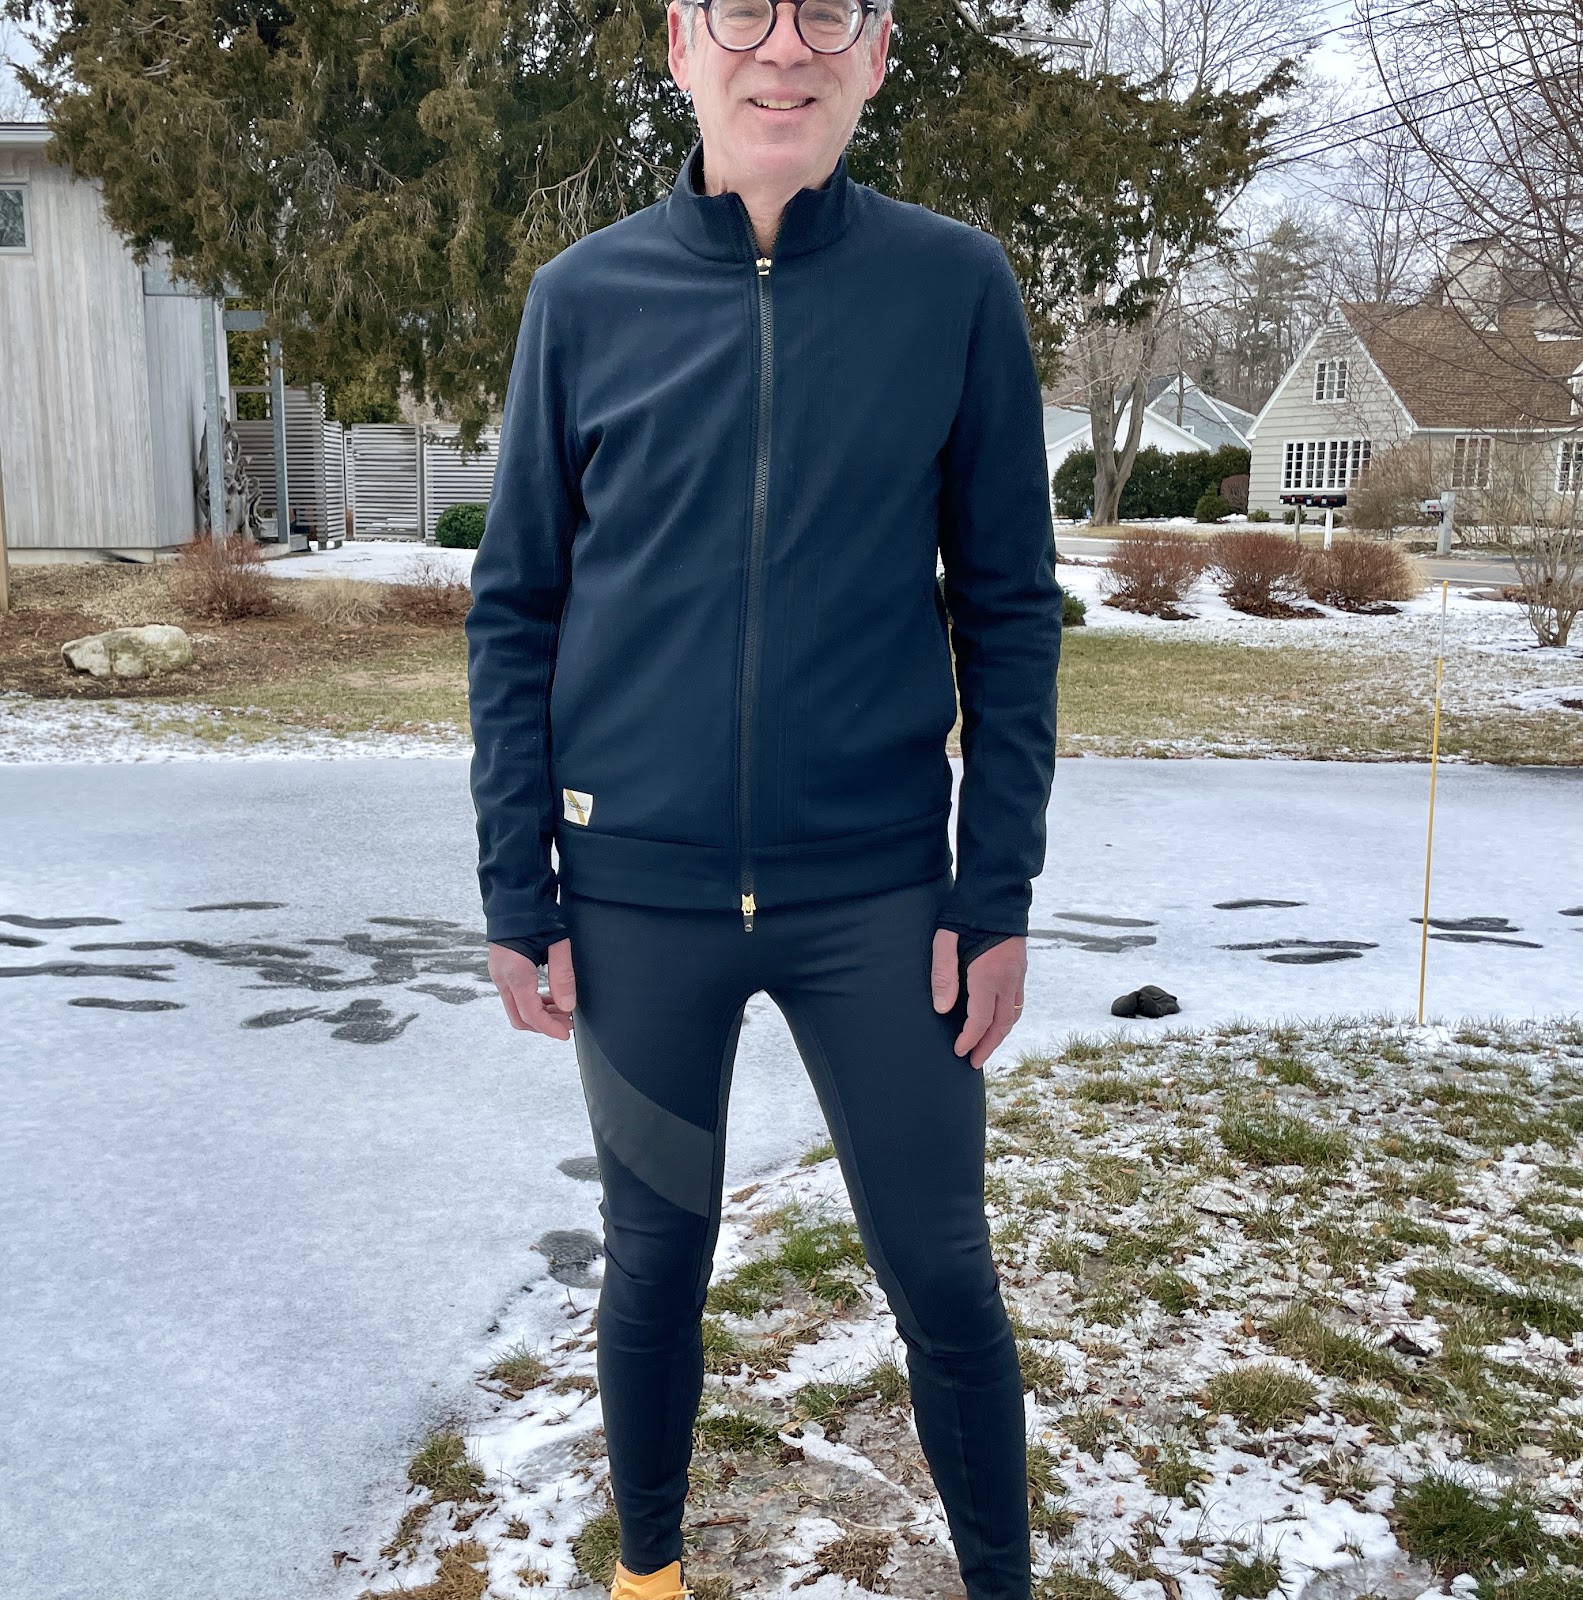 Tracksmith Cold Weather Gear Review - Believe in the Run